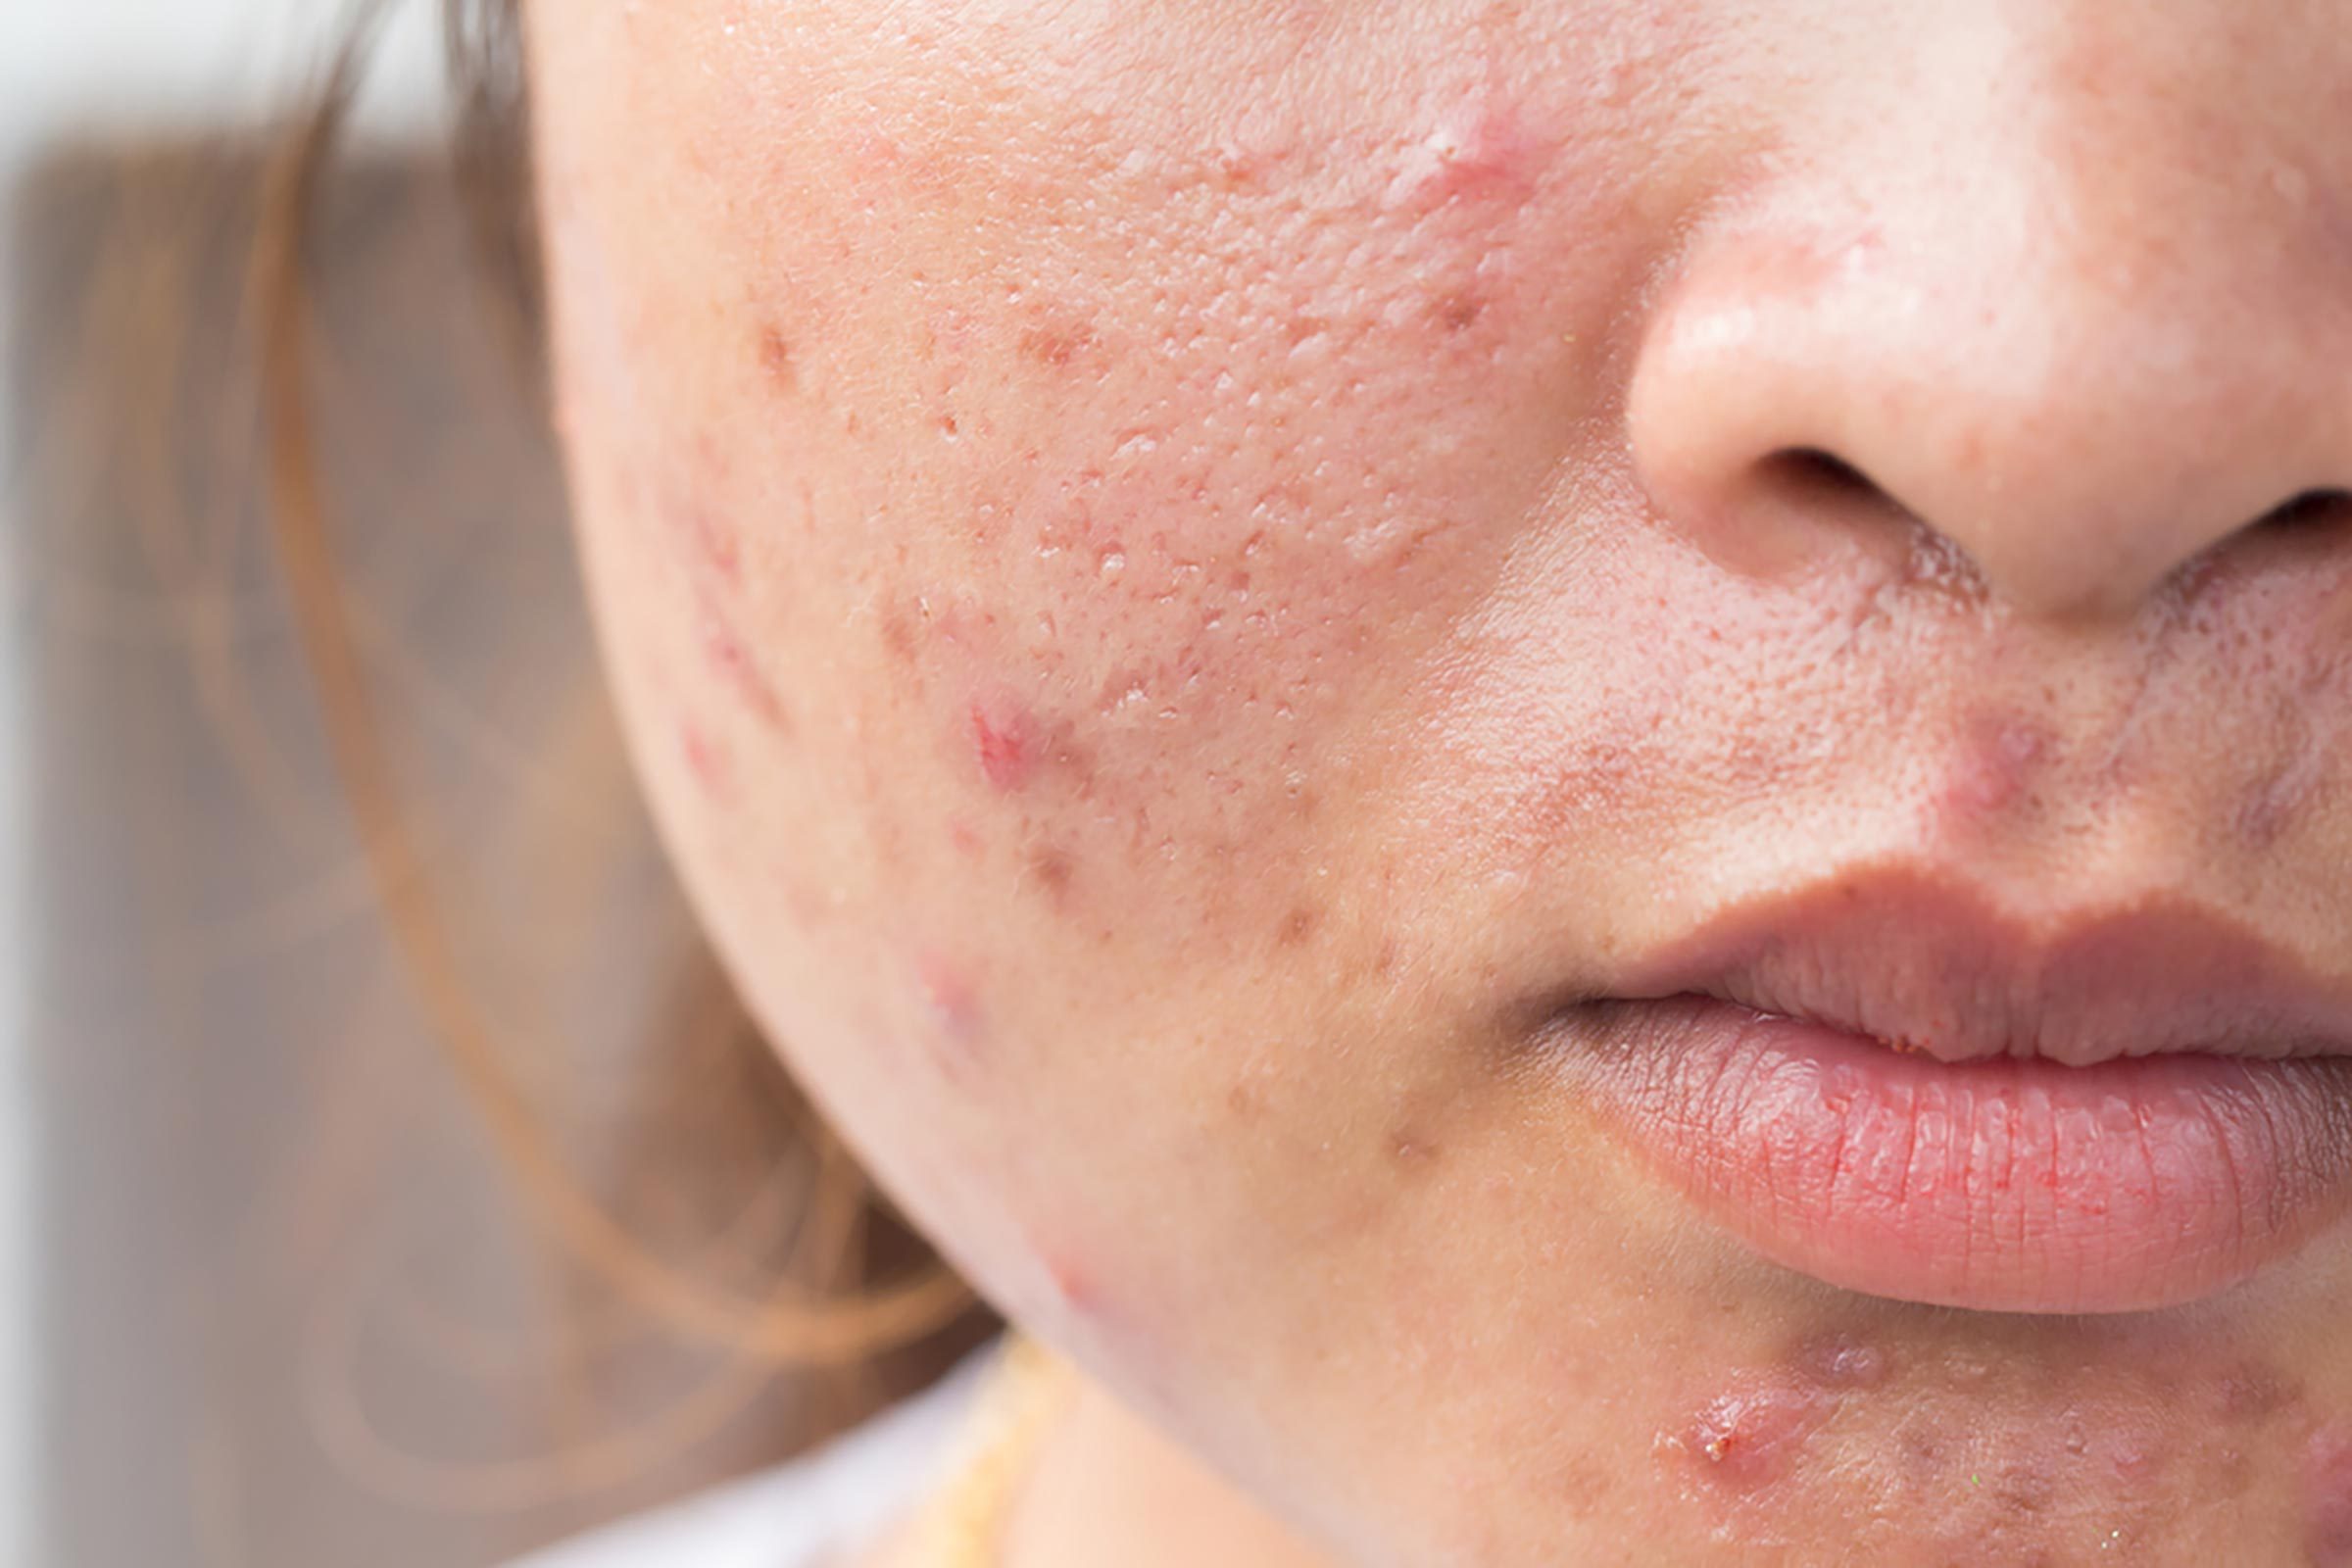 does metformin cause cystic acne